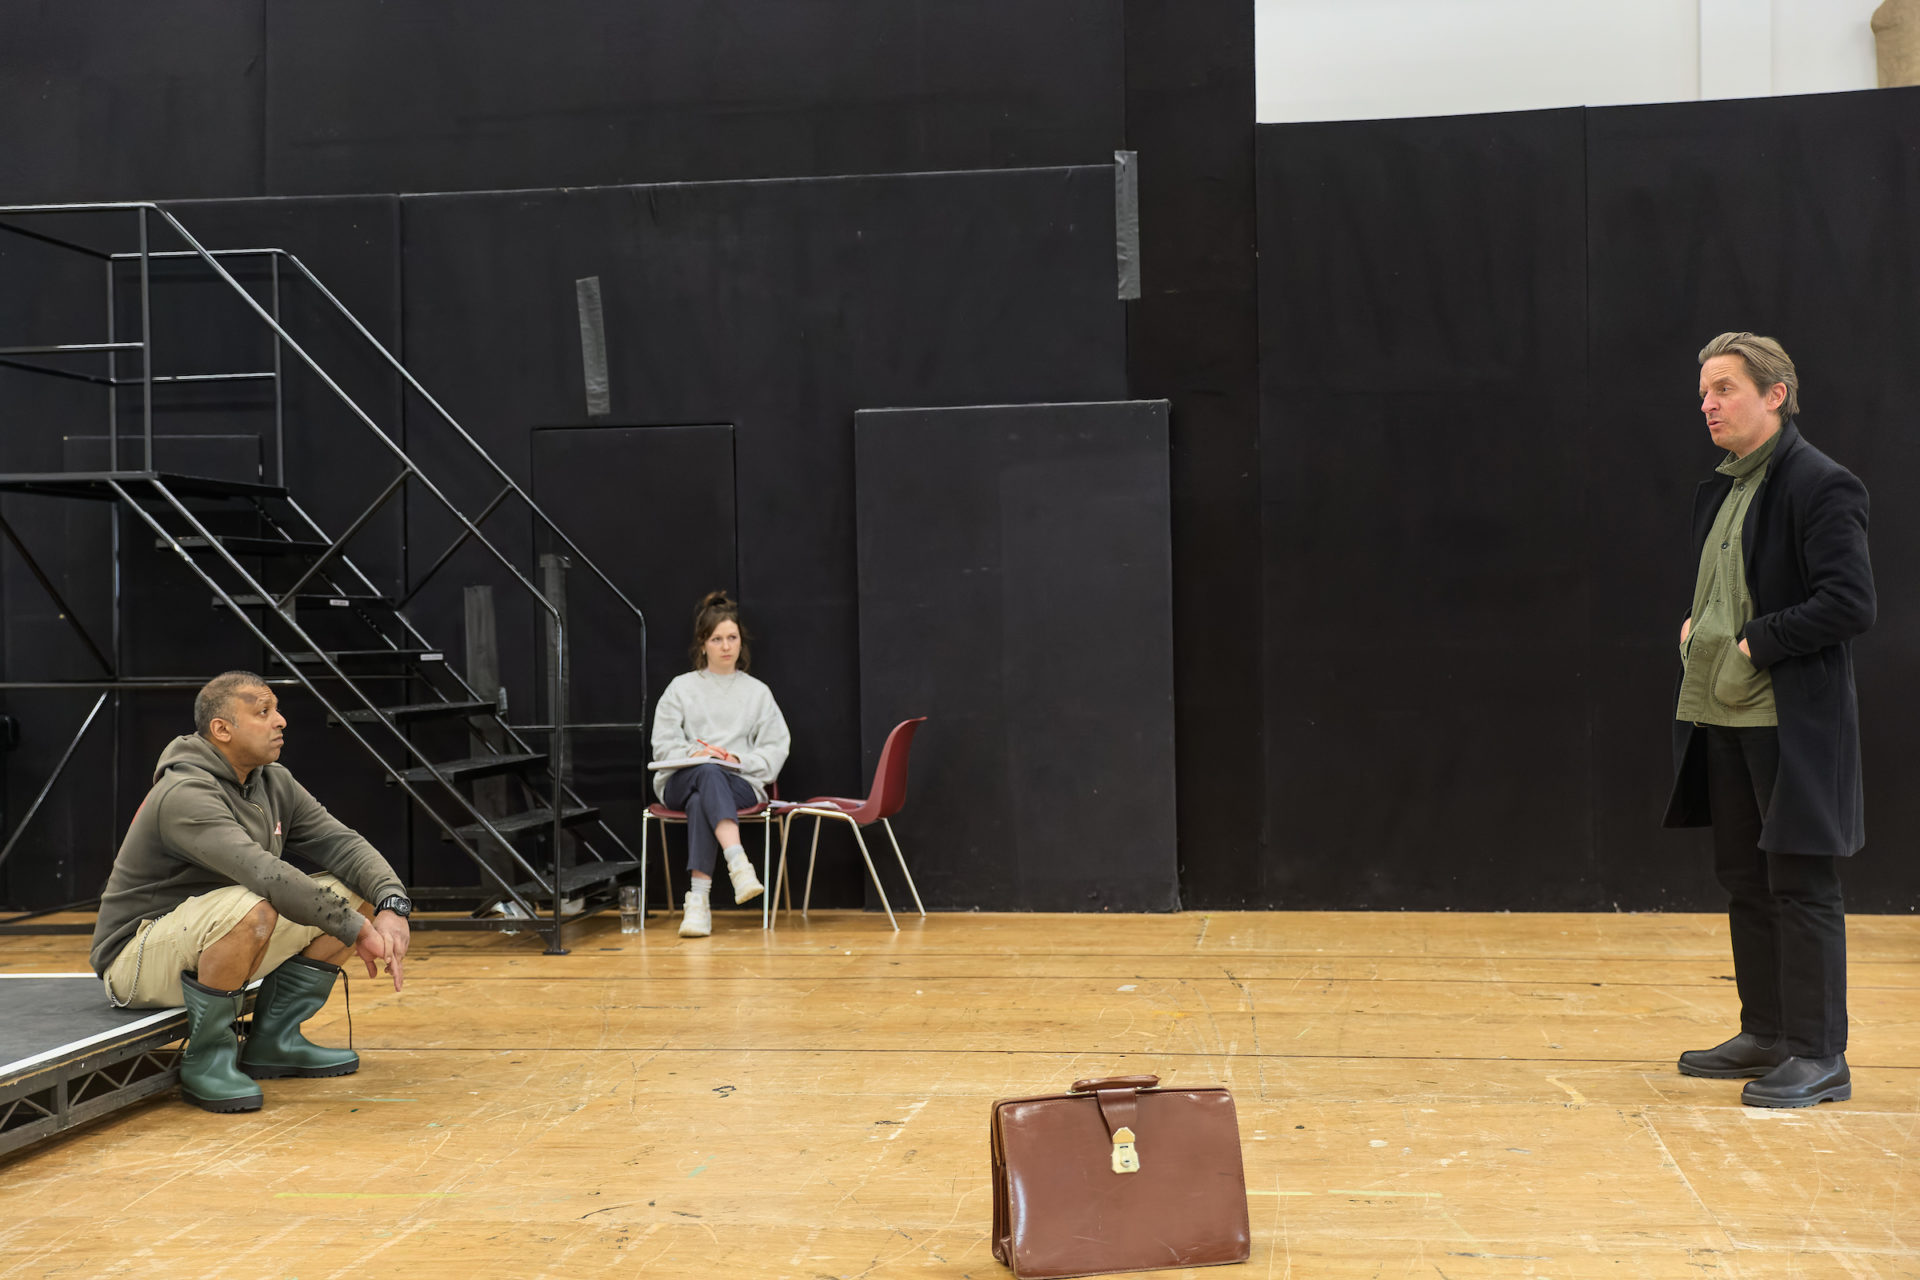 Rehearsals in Rehearsal Room 1 (image Mark Douet)